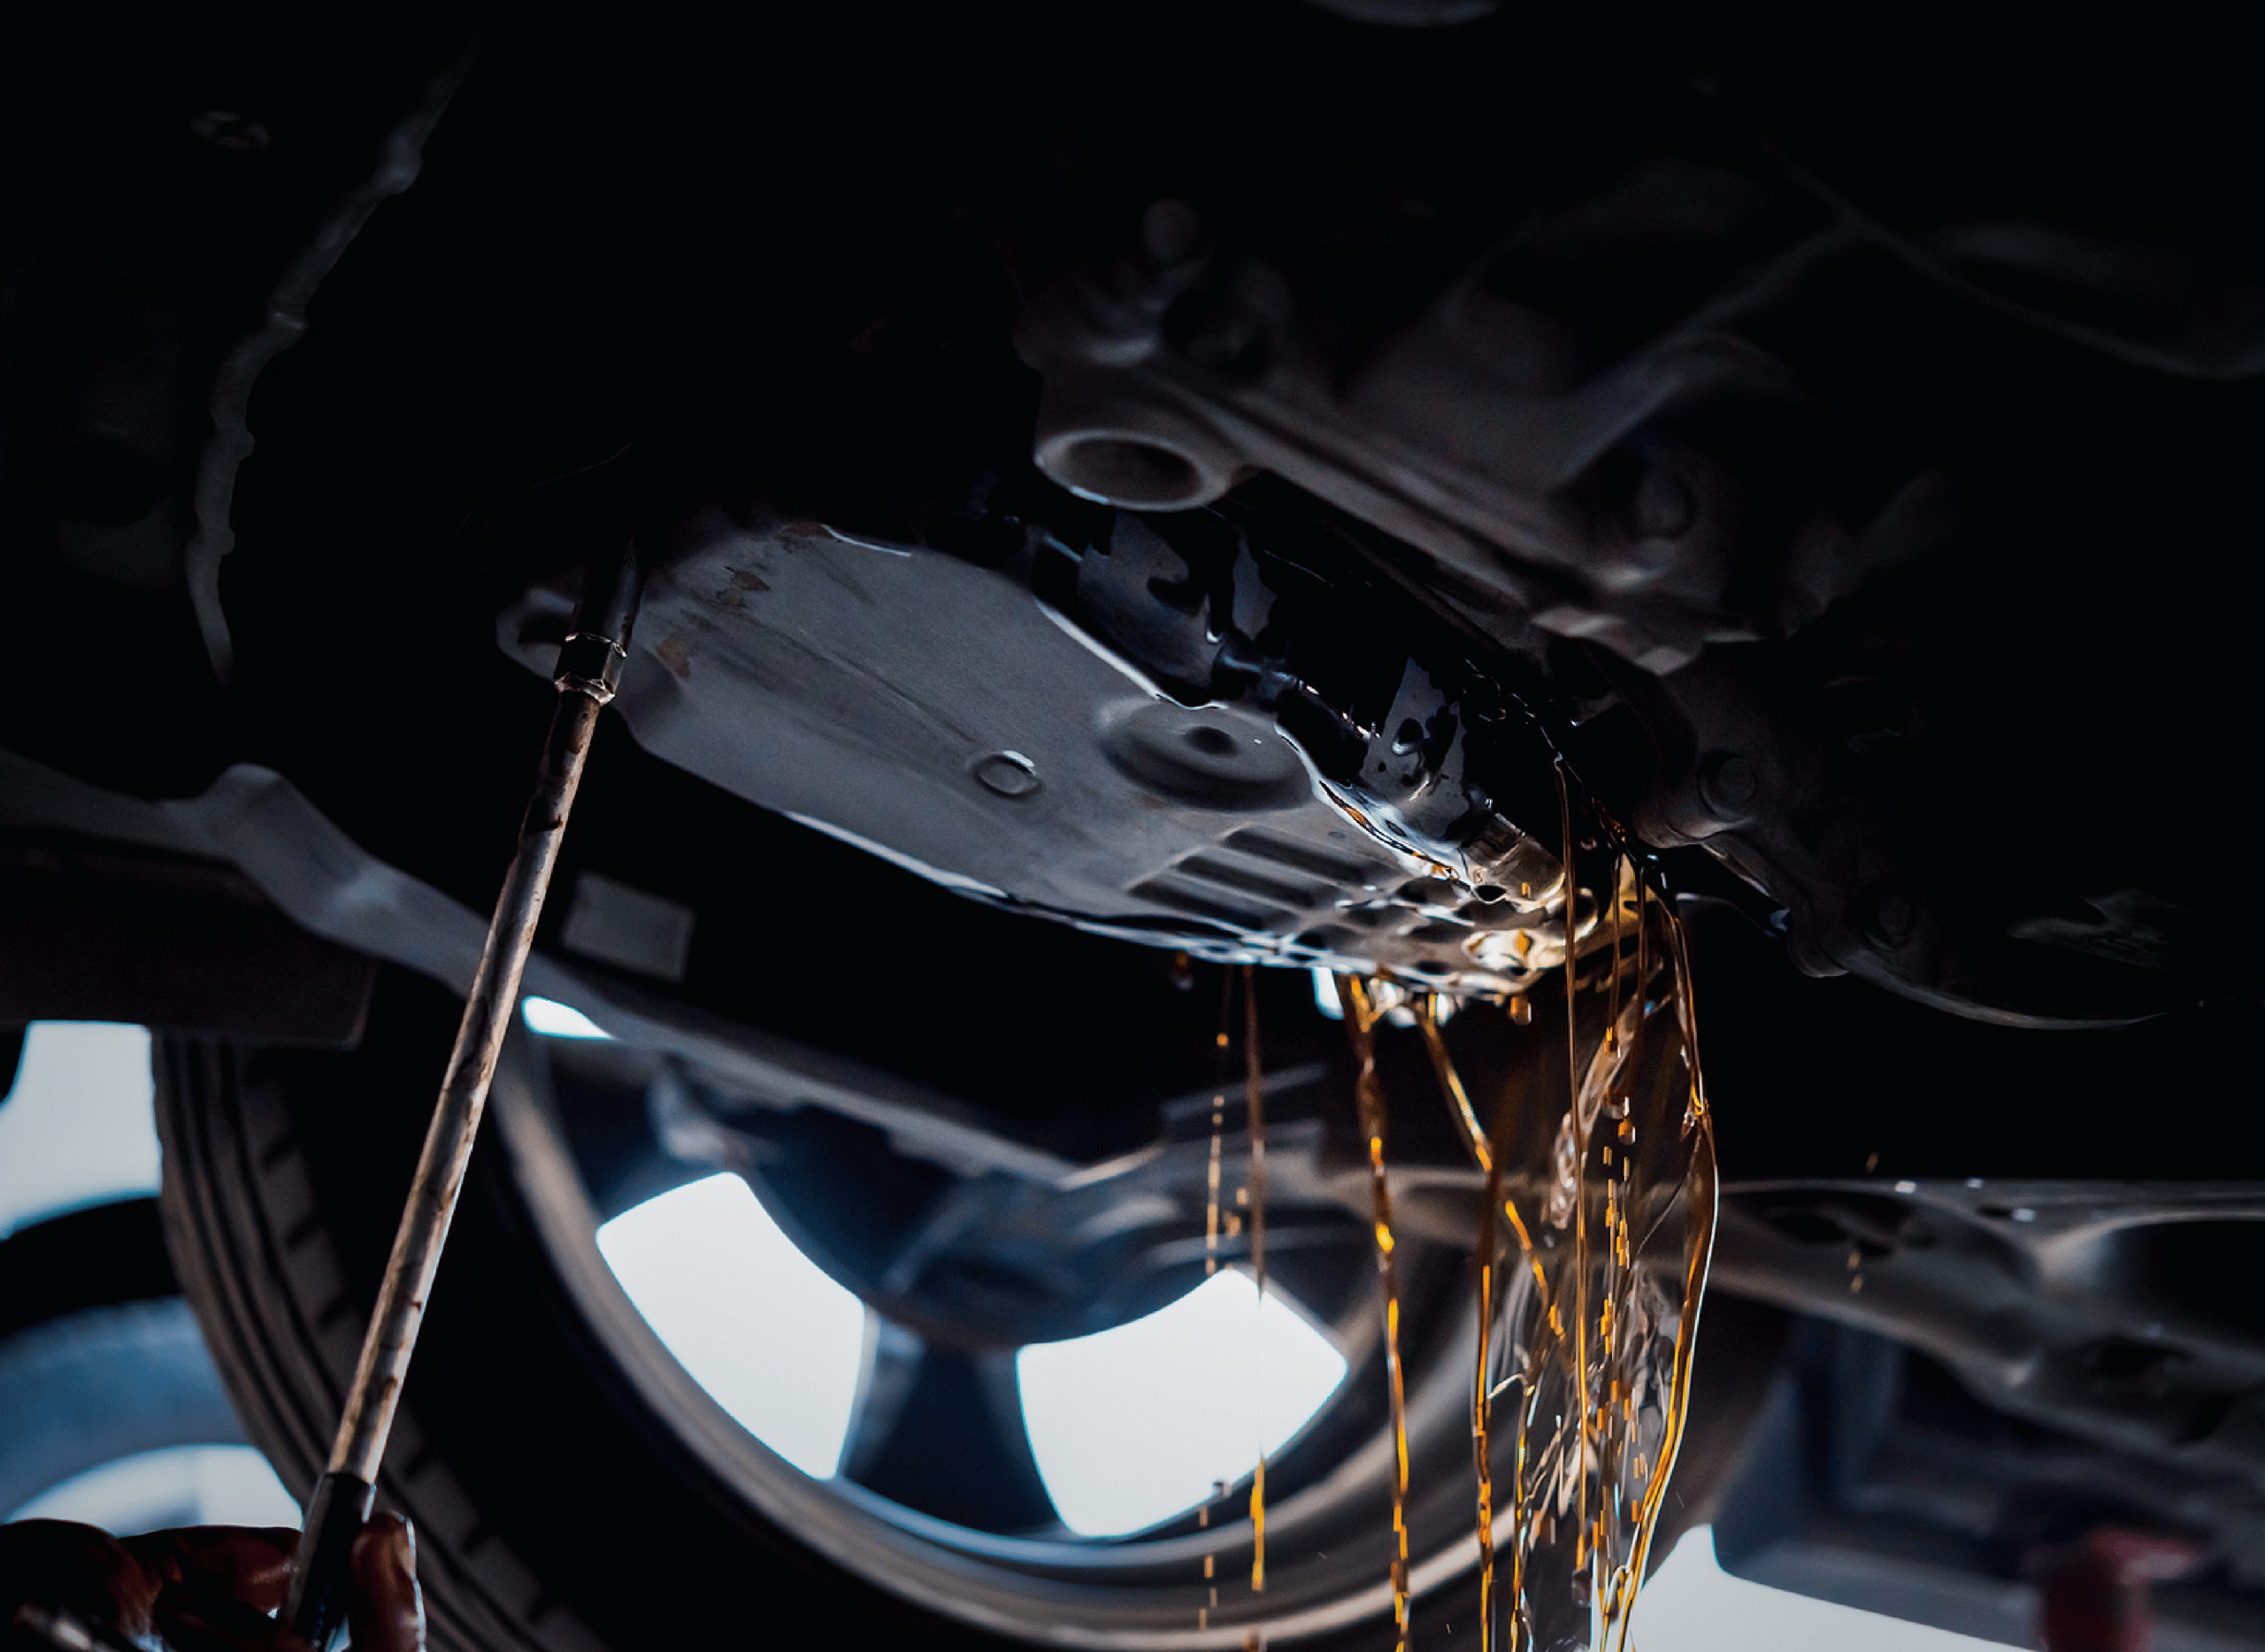 Image of an auto mechanic's hand and tool while changing transmission fluid at the underside of a vehicle. Concept image of filter replacement and fluid changes at Independent Auto and Diesel Repair.